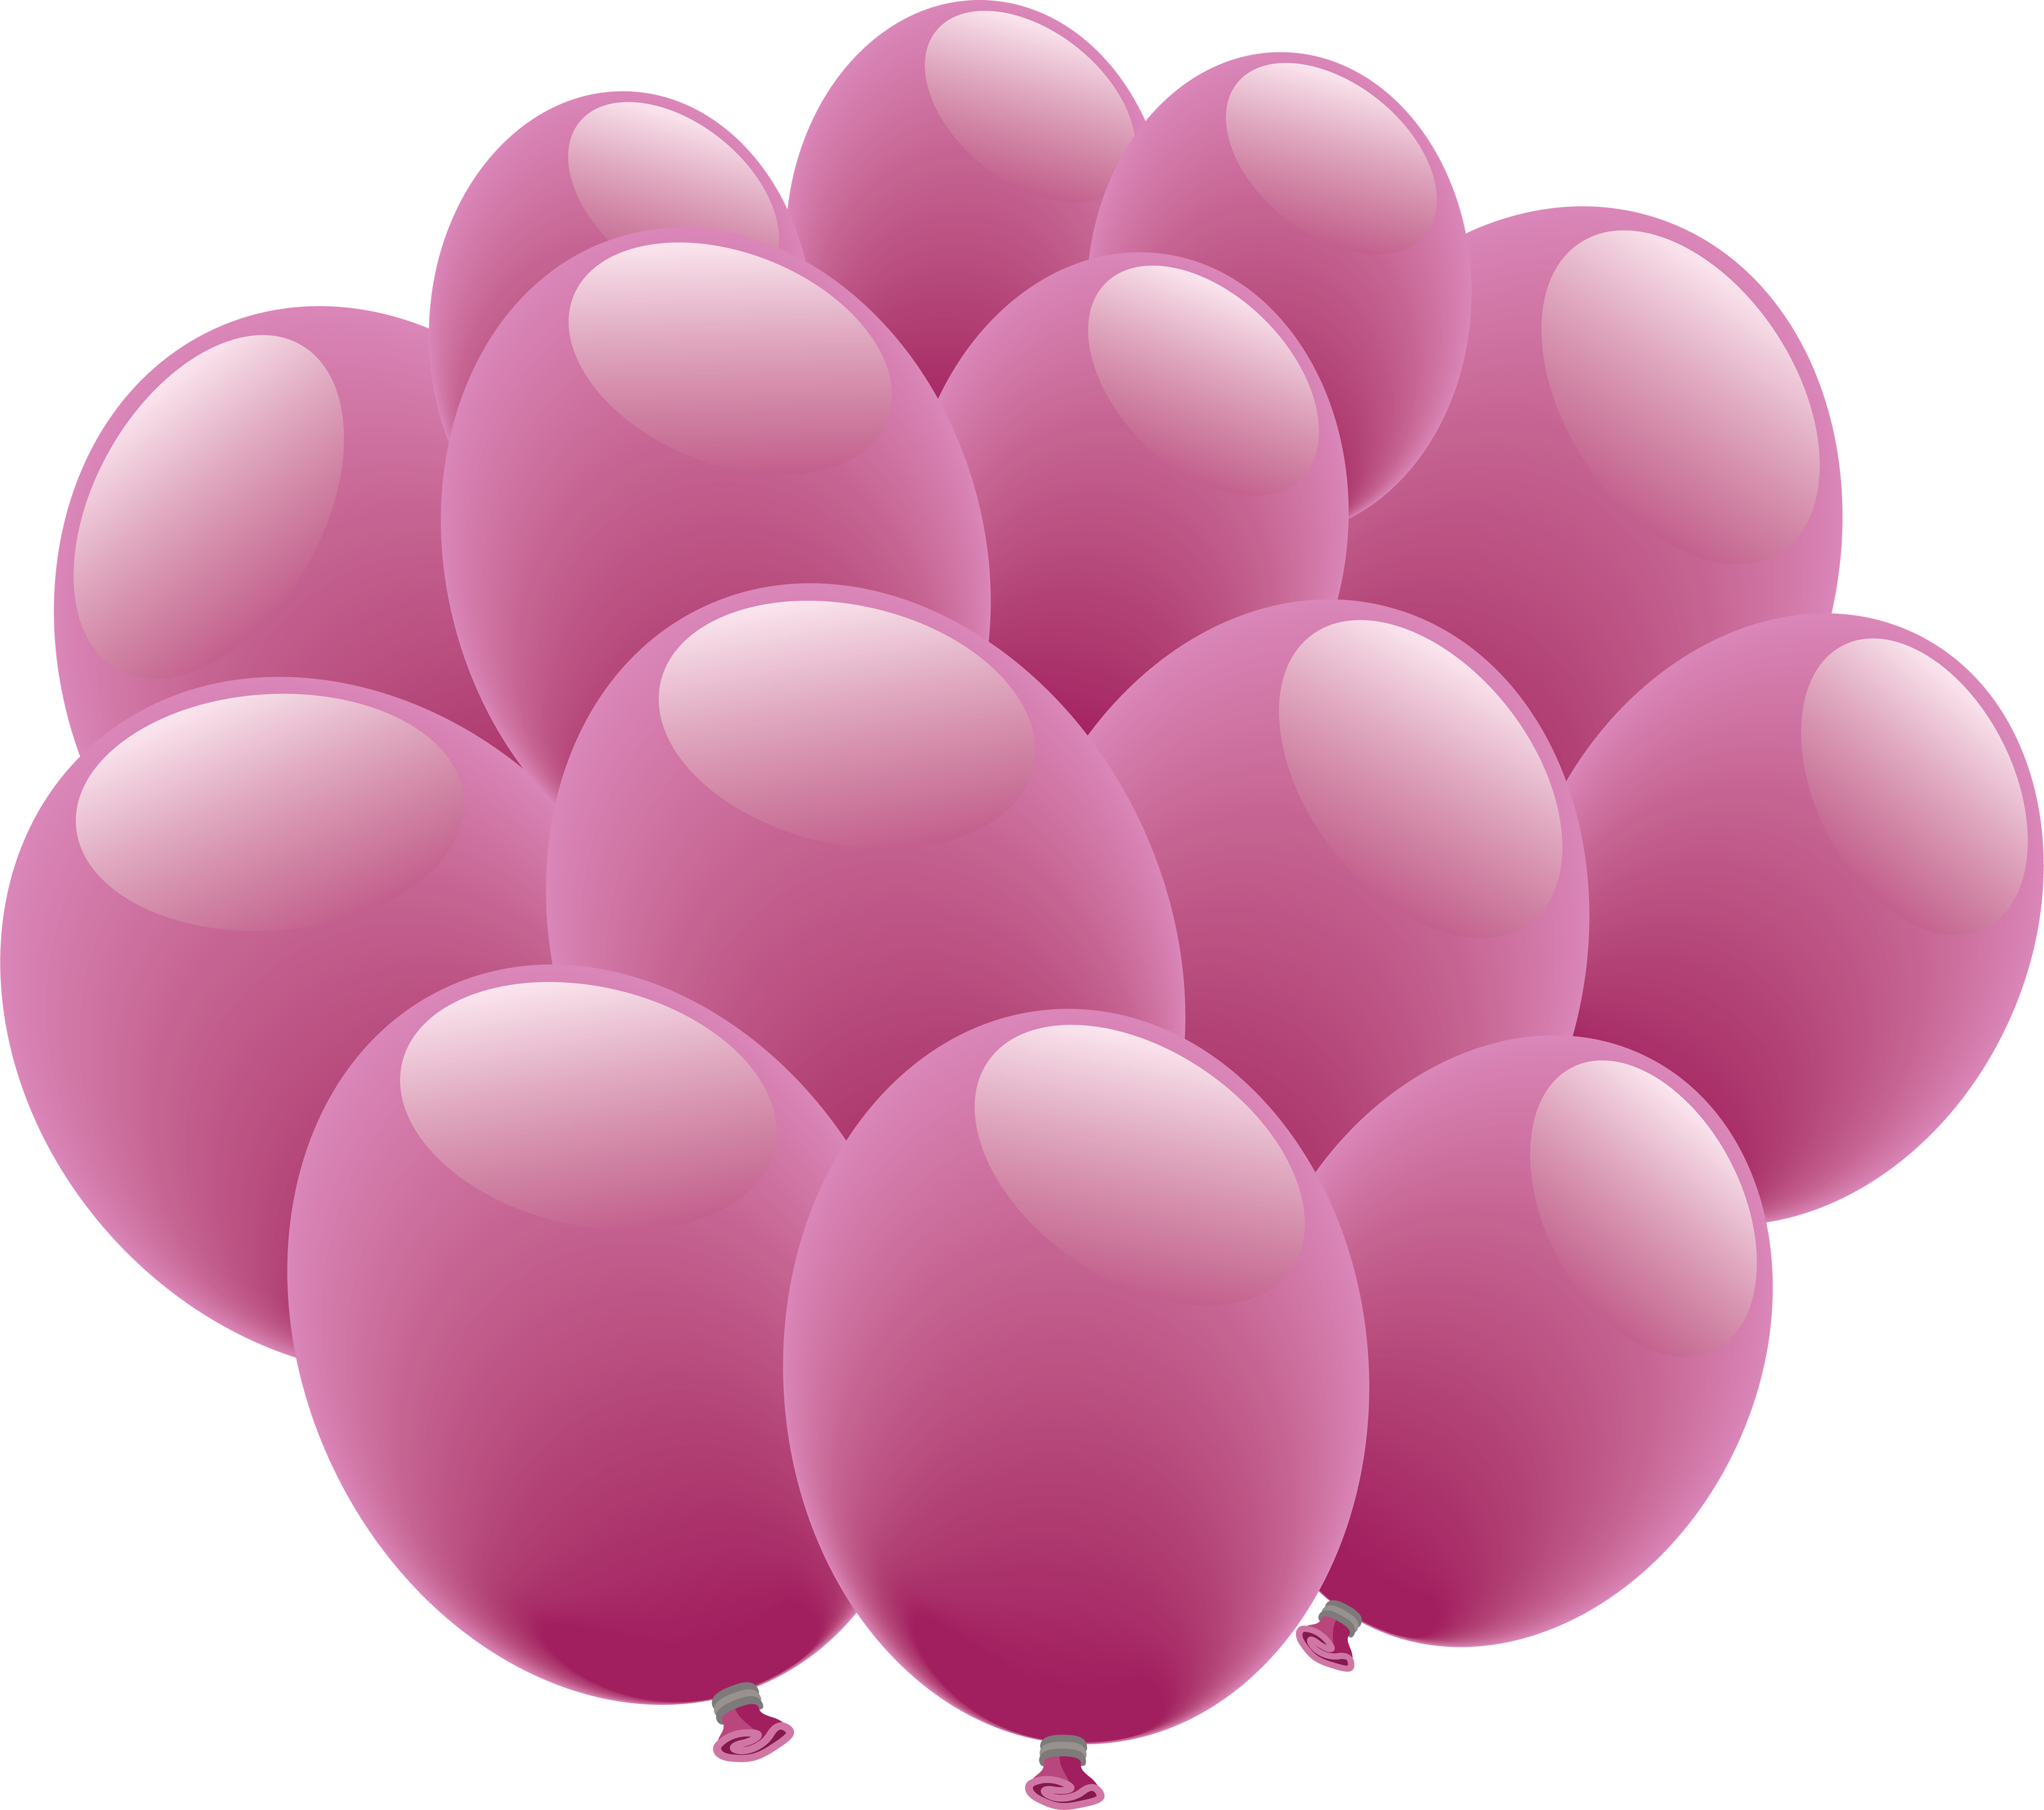 Balloon Png Images, Free Picture Download With Transparency - Pink Balloons Transparent Background (3637x3220)